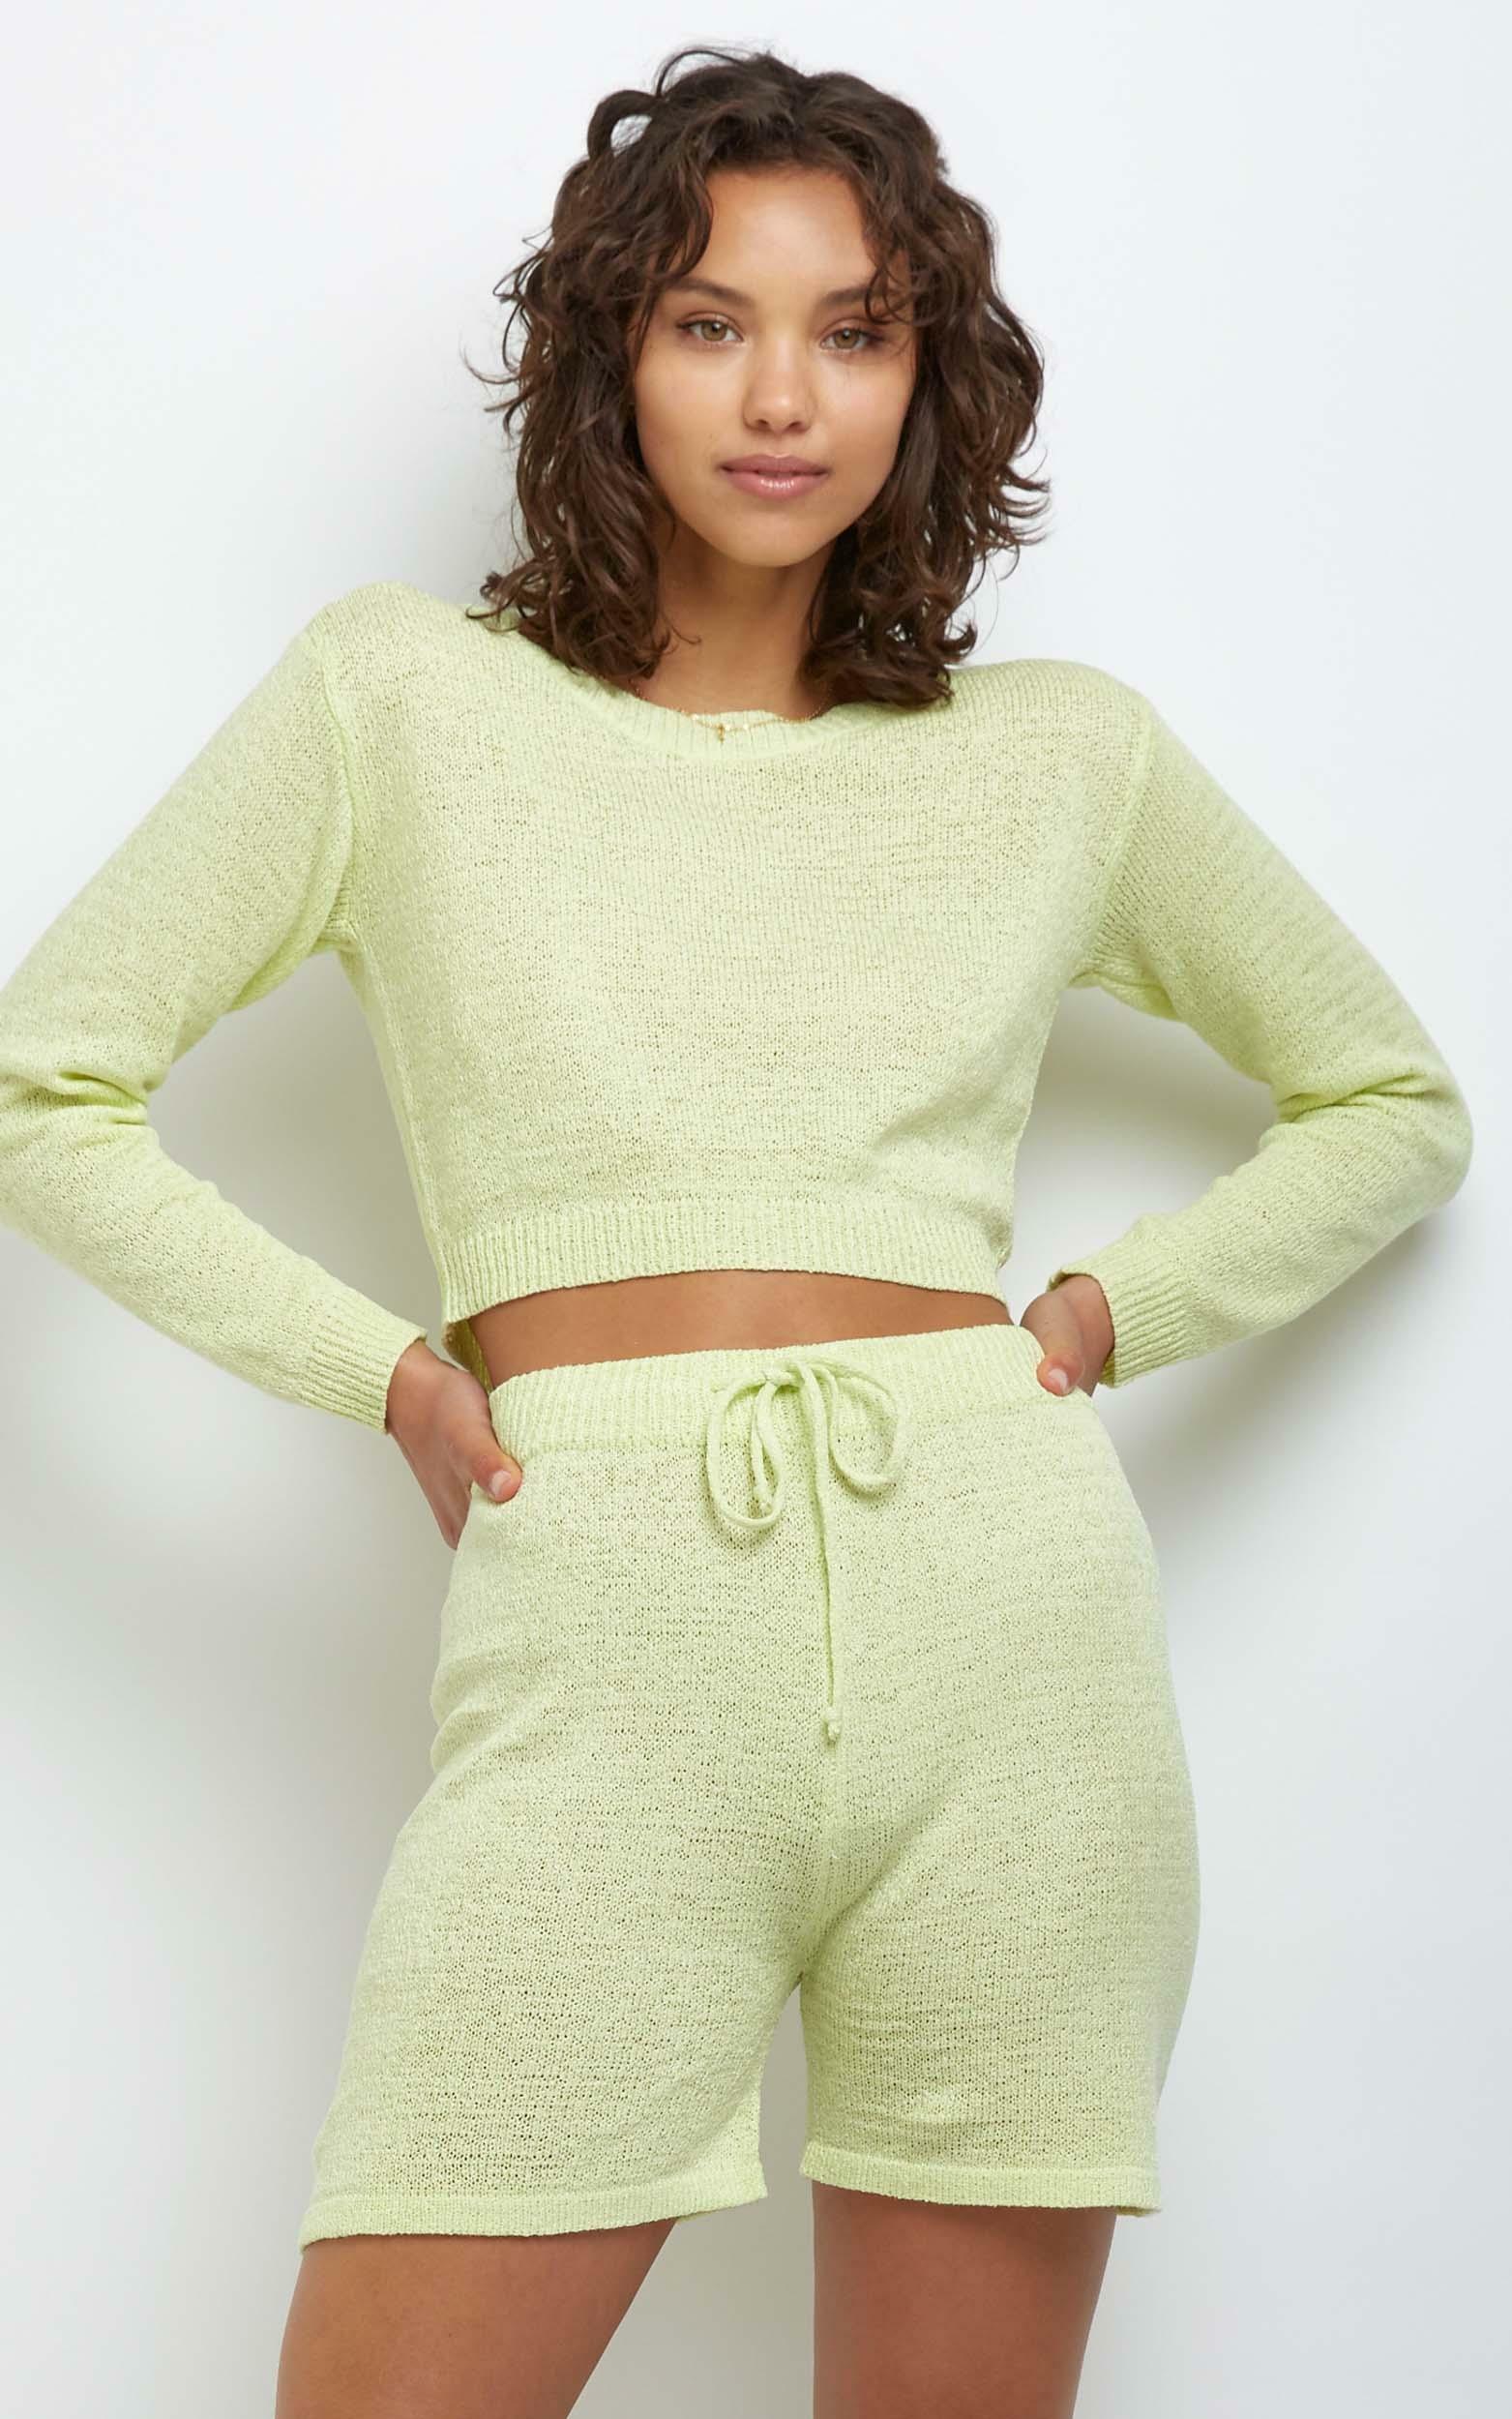 Dacia Knit Top in Yellow - L, Yellow, hi-res image number null